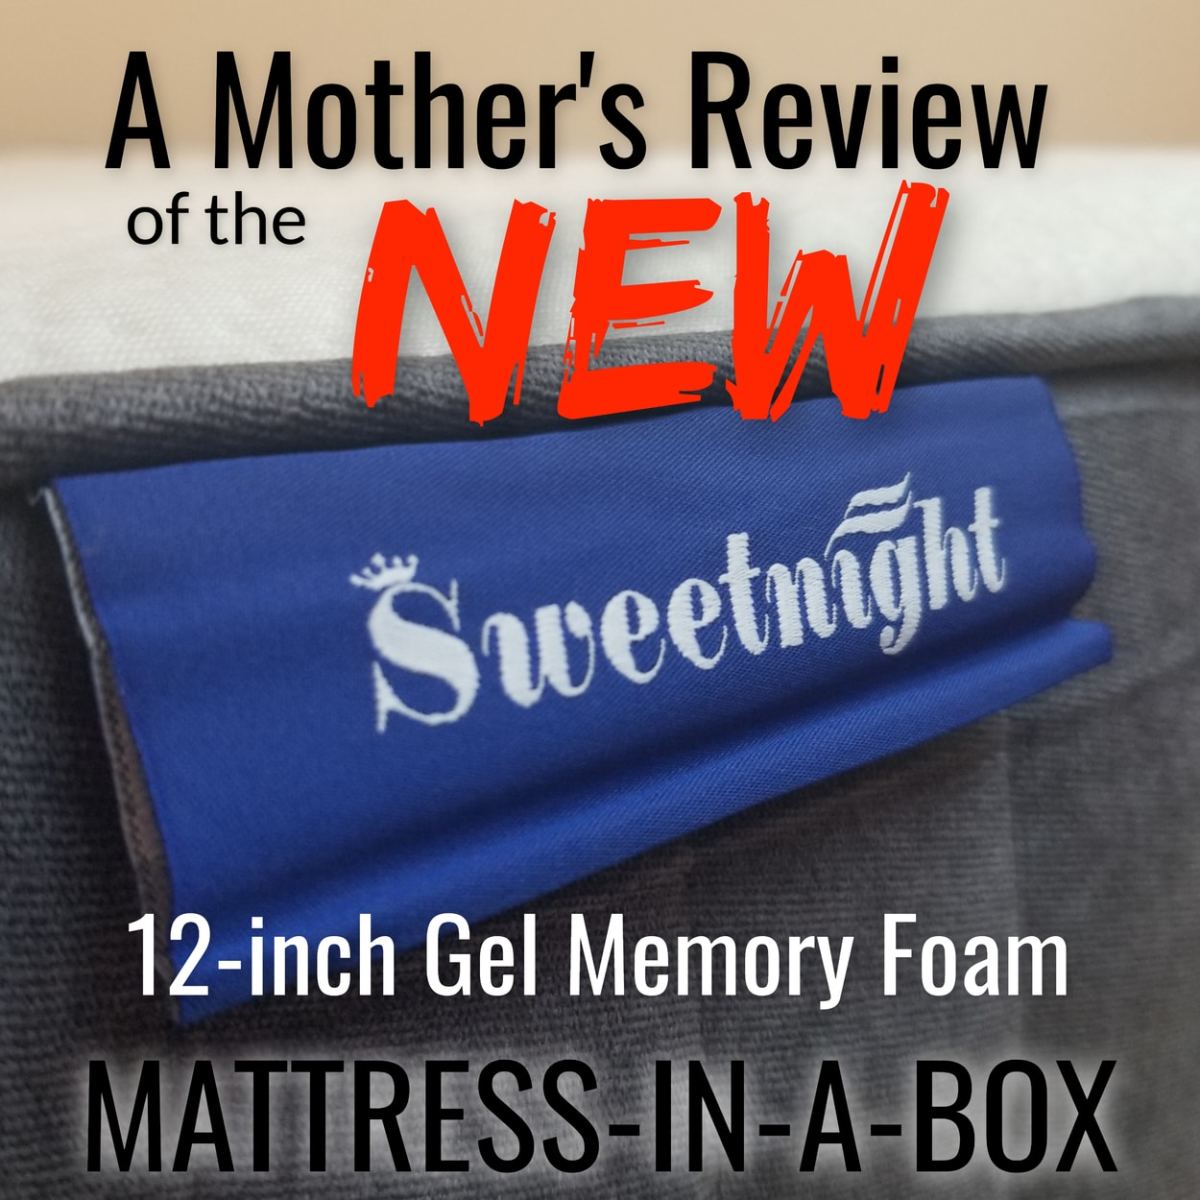 Read on for a review of this 12-inch memory foam mattress.